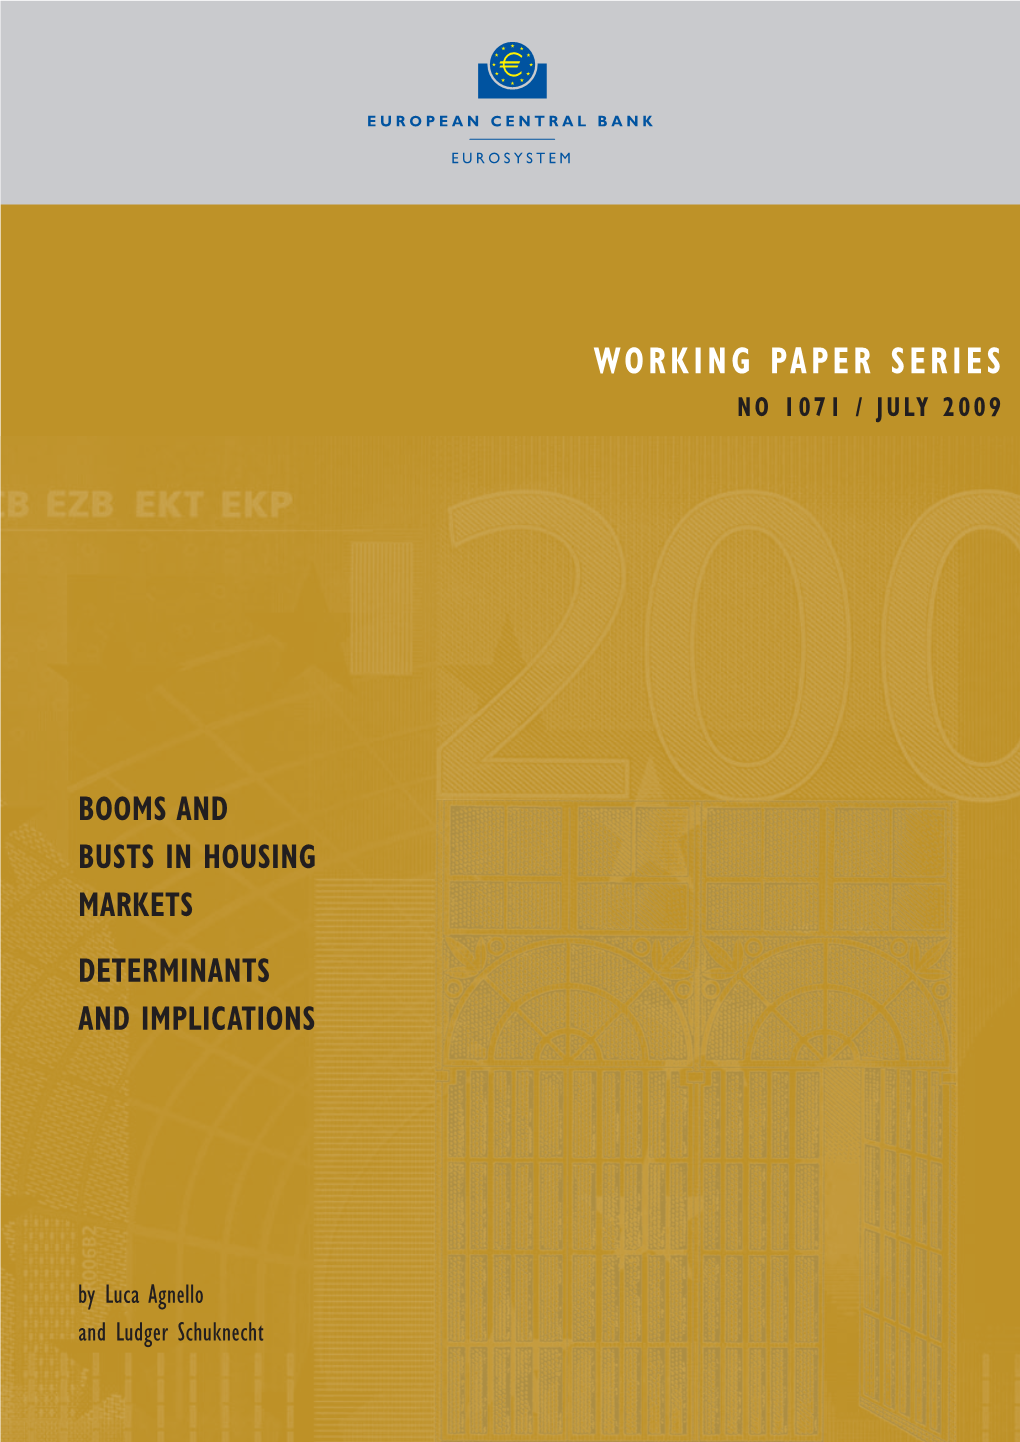 Booms and Busts in Housing Markets: Determinants and Implications” by L